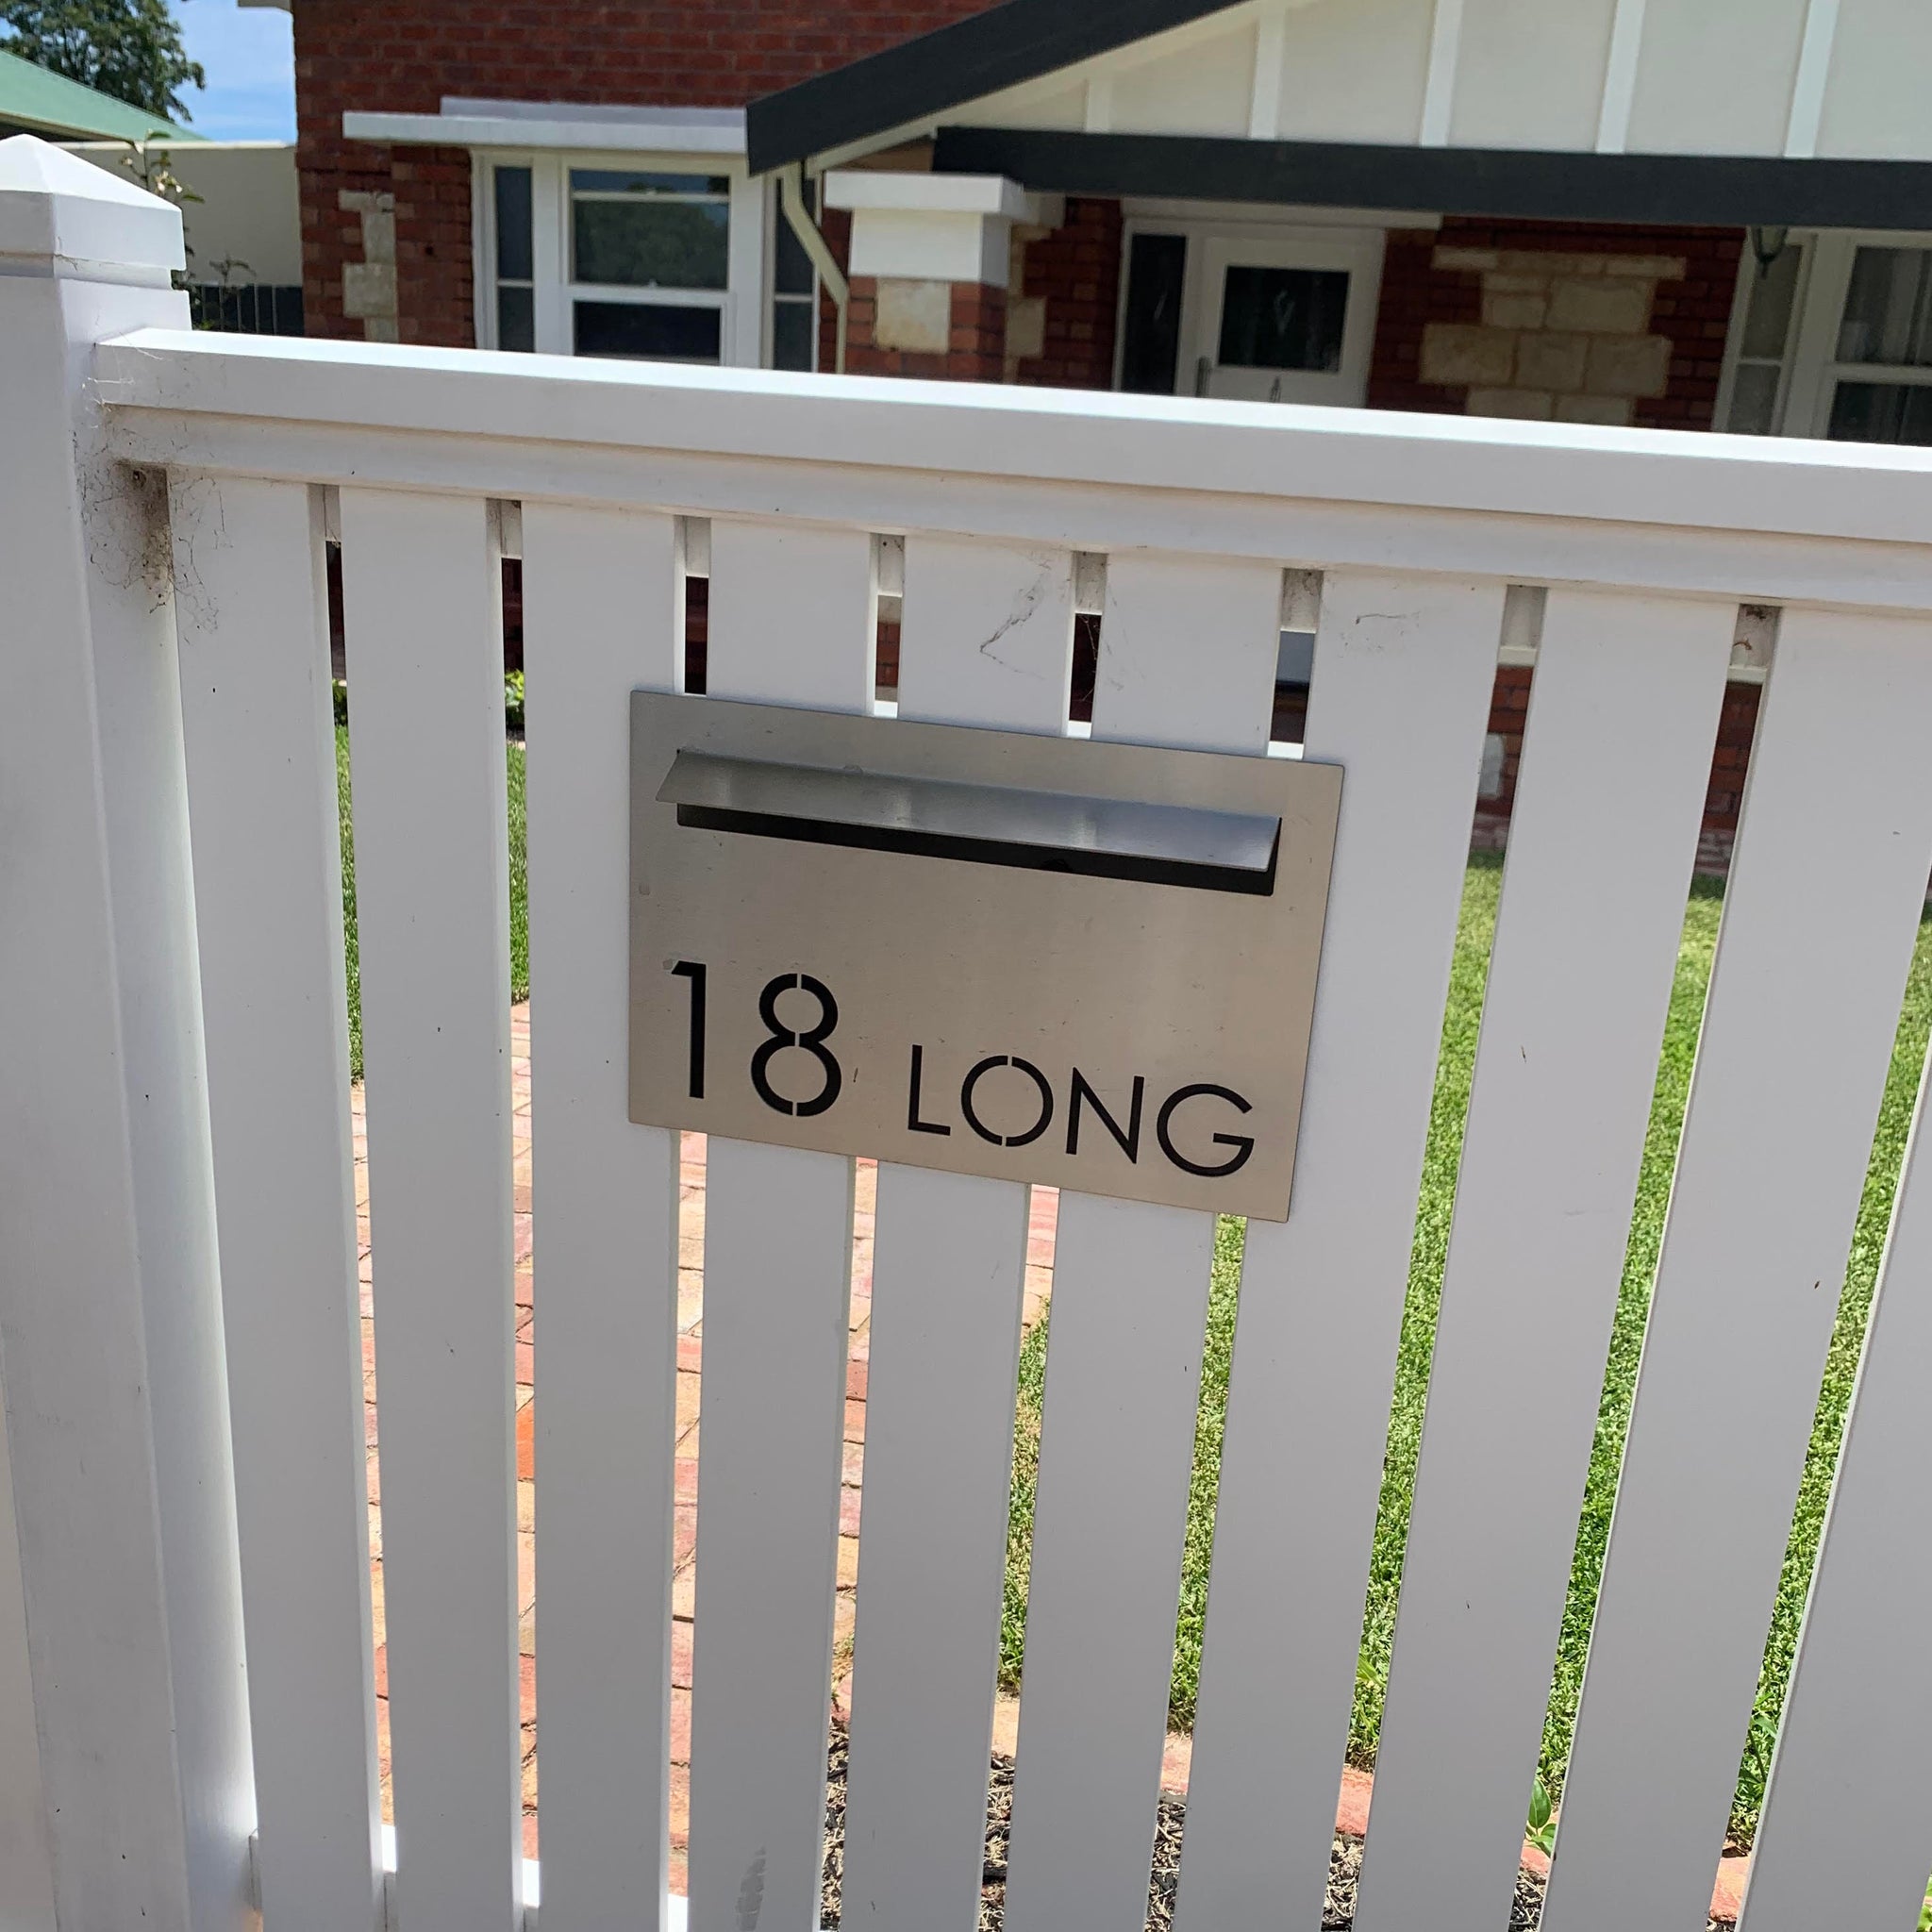 custom letterbox faceplates option 2 installed in picket fence